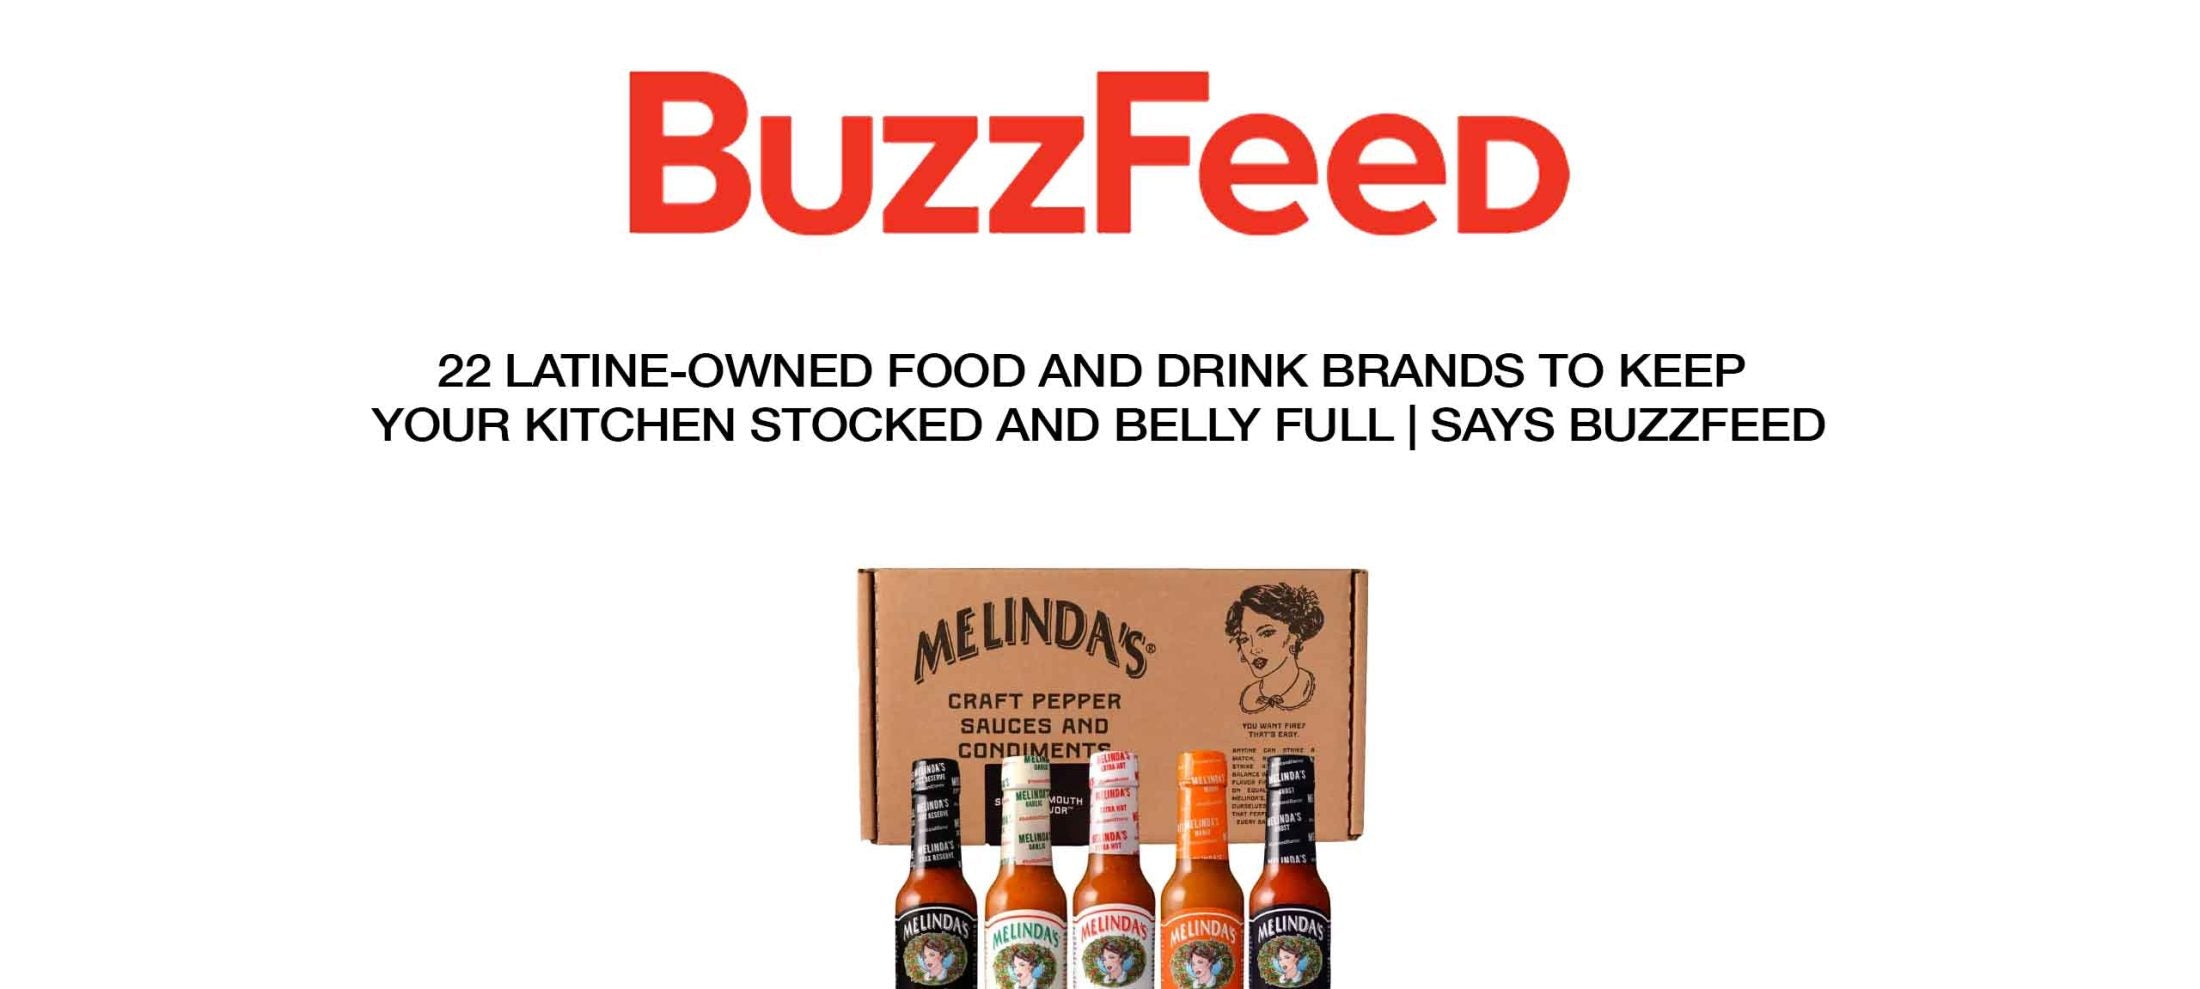 22 Latine-Owned Food And Drink Brands To Keep Your Kitchen Stocked And Belly Full | Says BuzzFeed